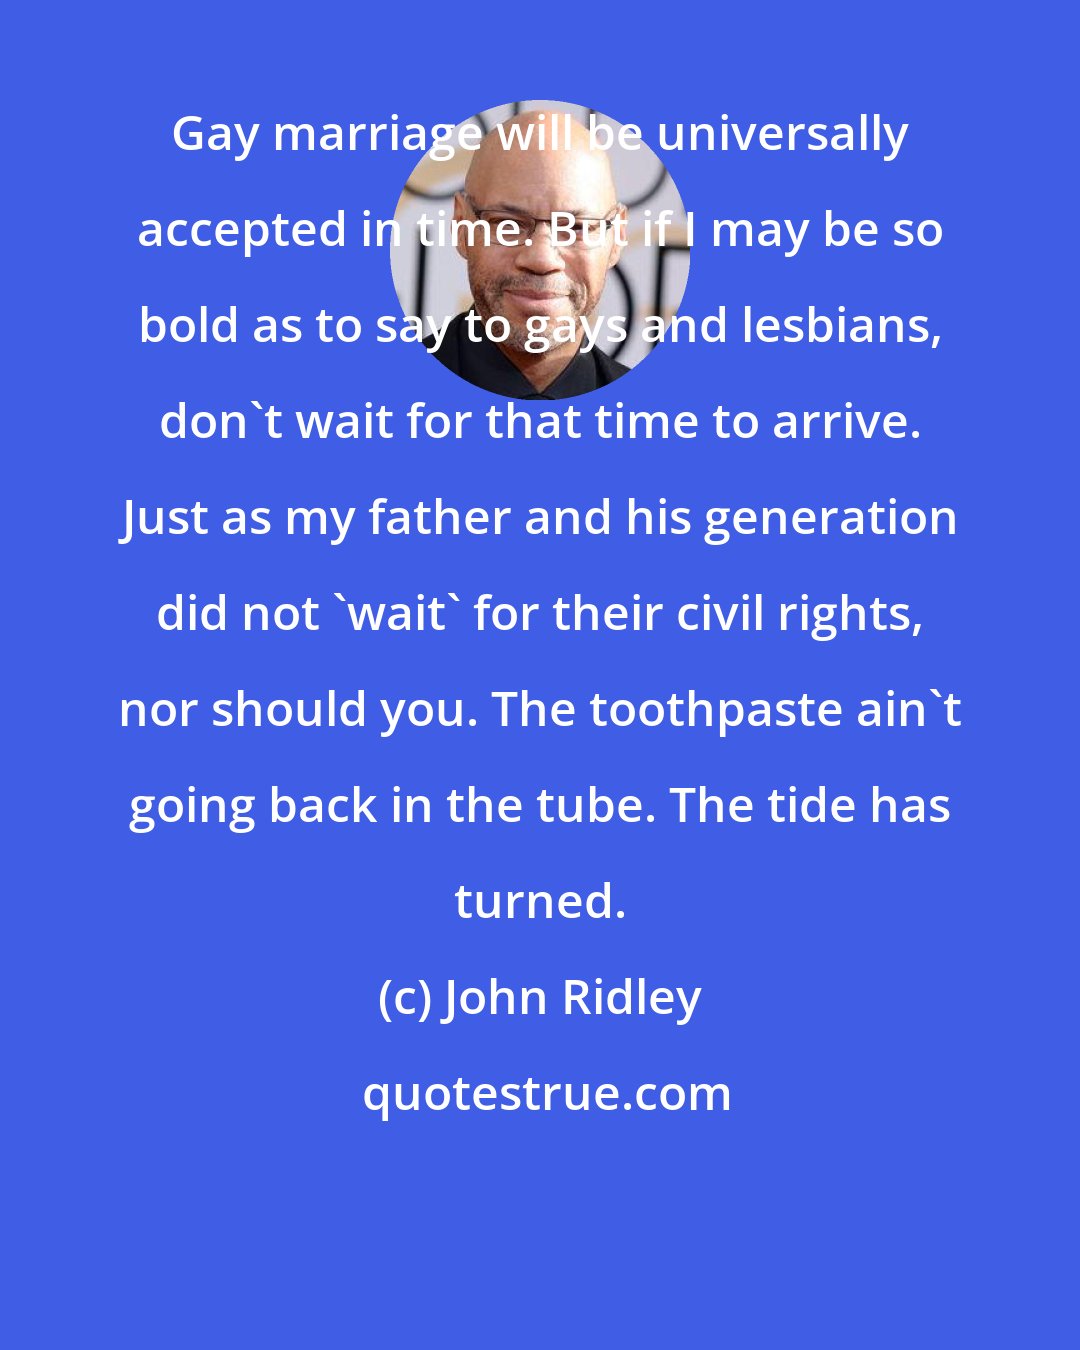 John Ridley: Gay marriage will be universally accepted in time. But if I may be so bold as to say to gays and lesbians, don't wait for that time to arrive. Just as my father and his generation did not 'wait' for their civil rights, nor should you. The toothpaste ain't going back in the tube. The tide has turned.